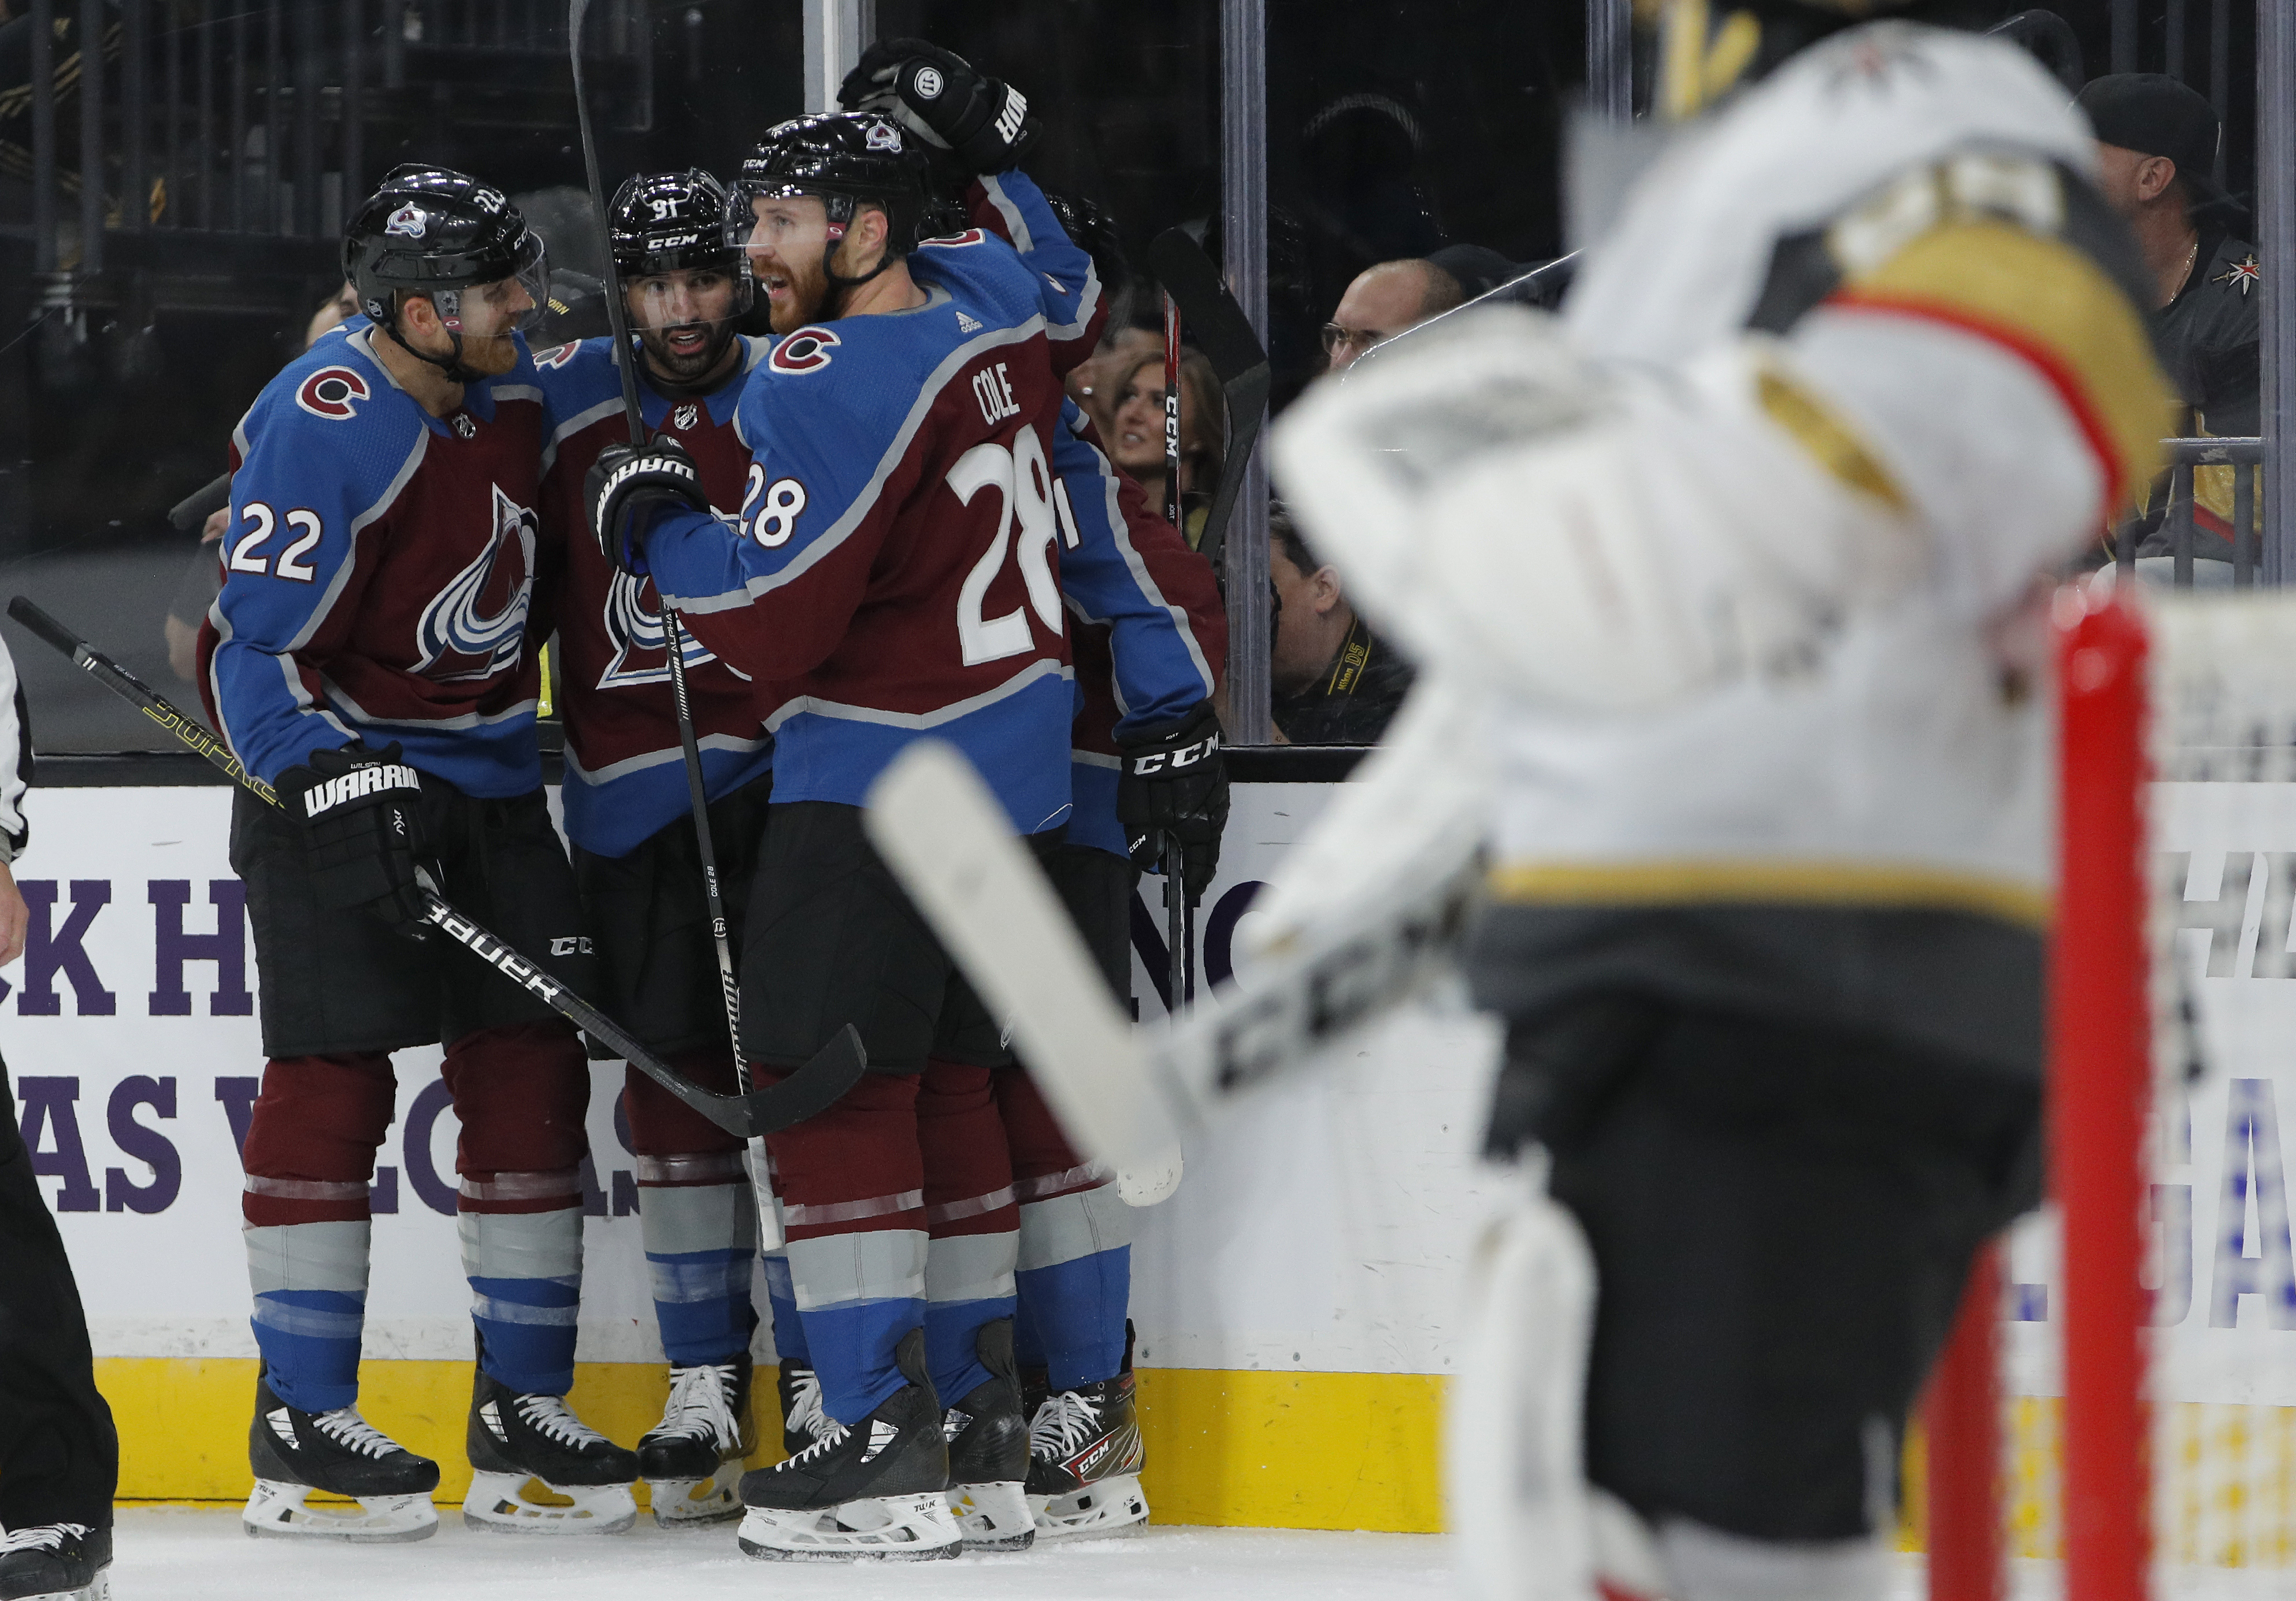 Avalanche beats Golden Knights 6-1 to improve to 8-1-1